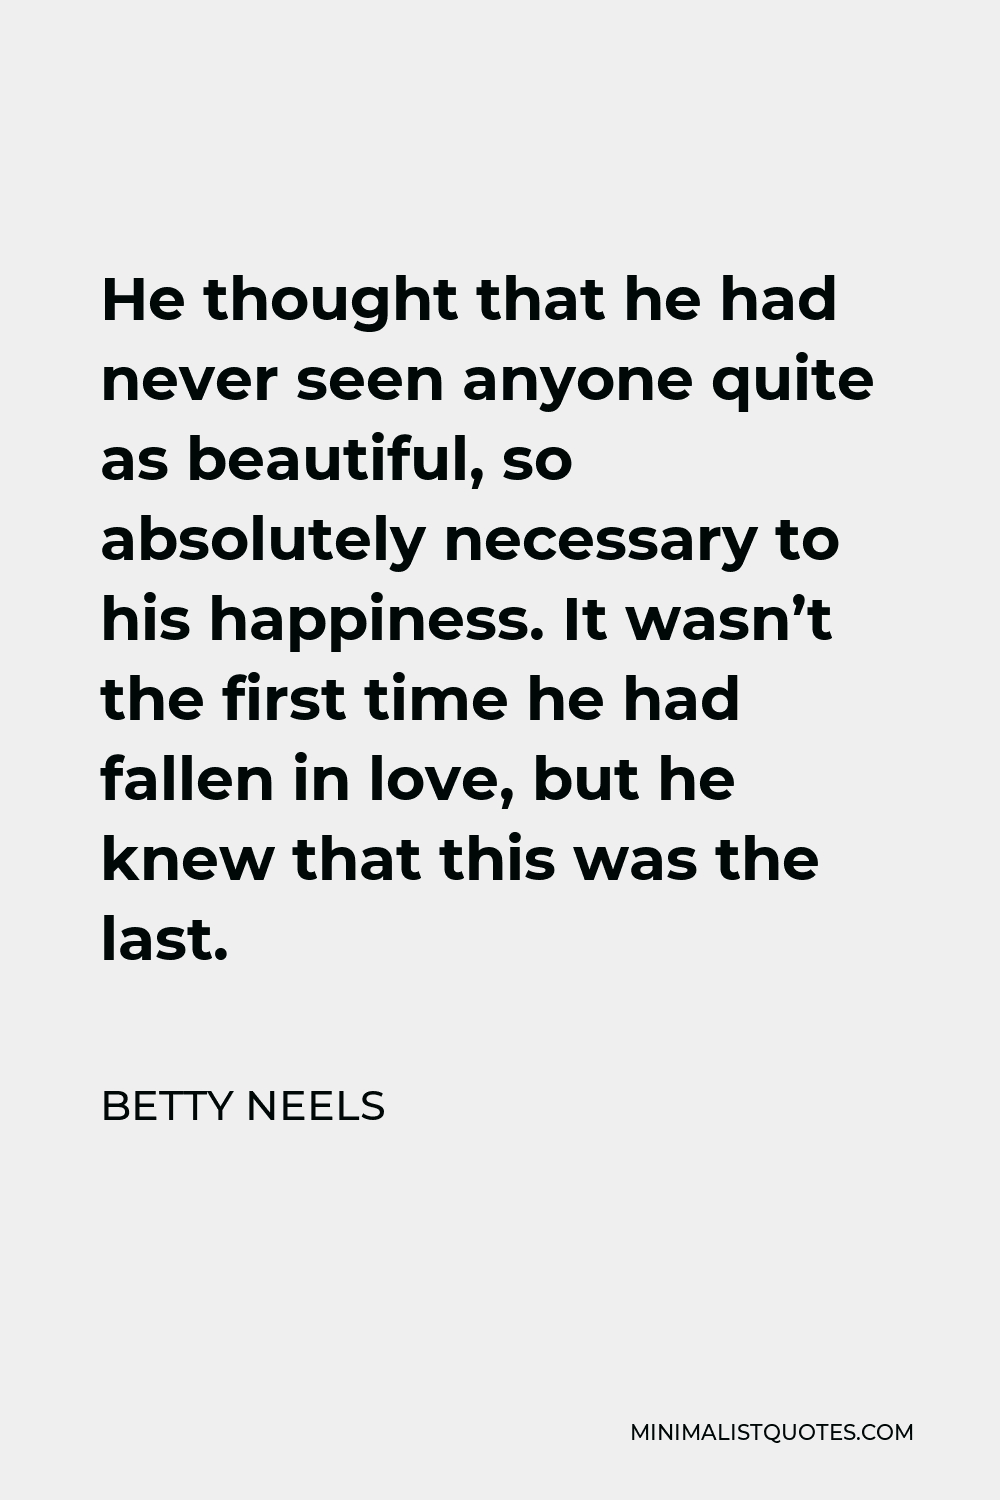 Betty Neels Quote - He thought that he had never seen anyone quite as beautiful, so absolutely necessary to his happiness. It wasn’t the first time he had fallen in love, but he knew that this was the last.